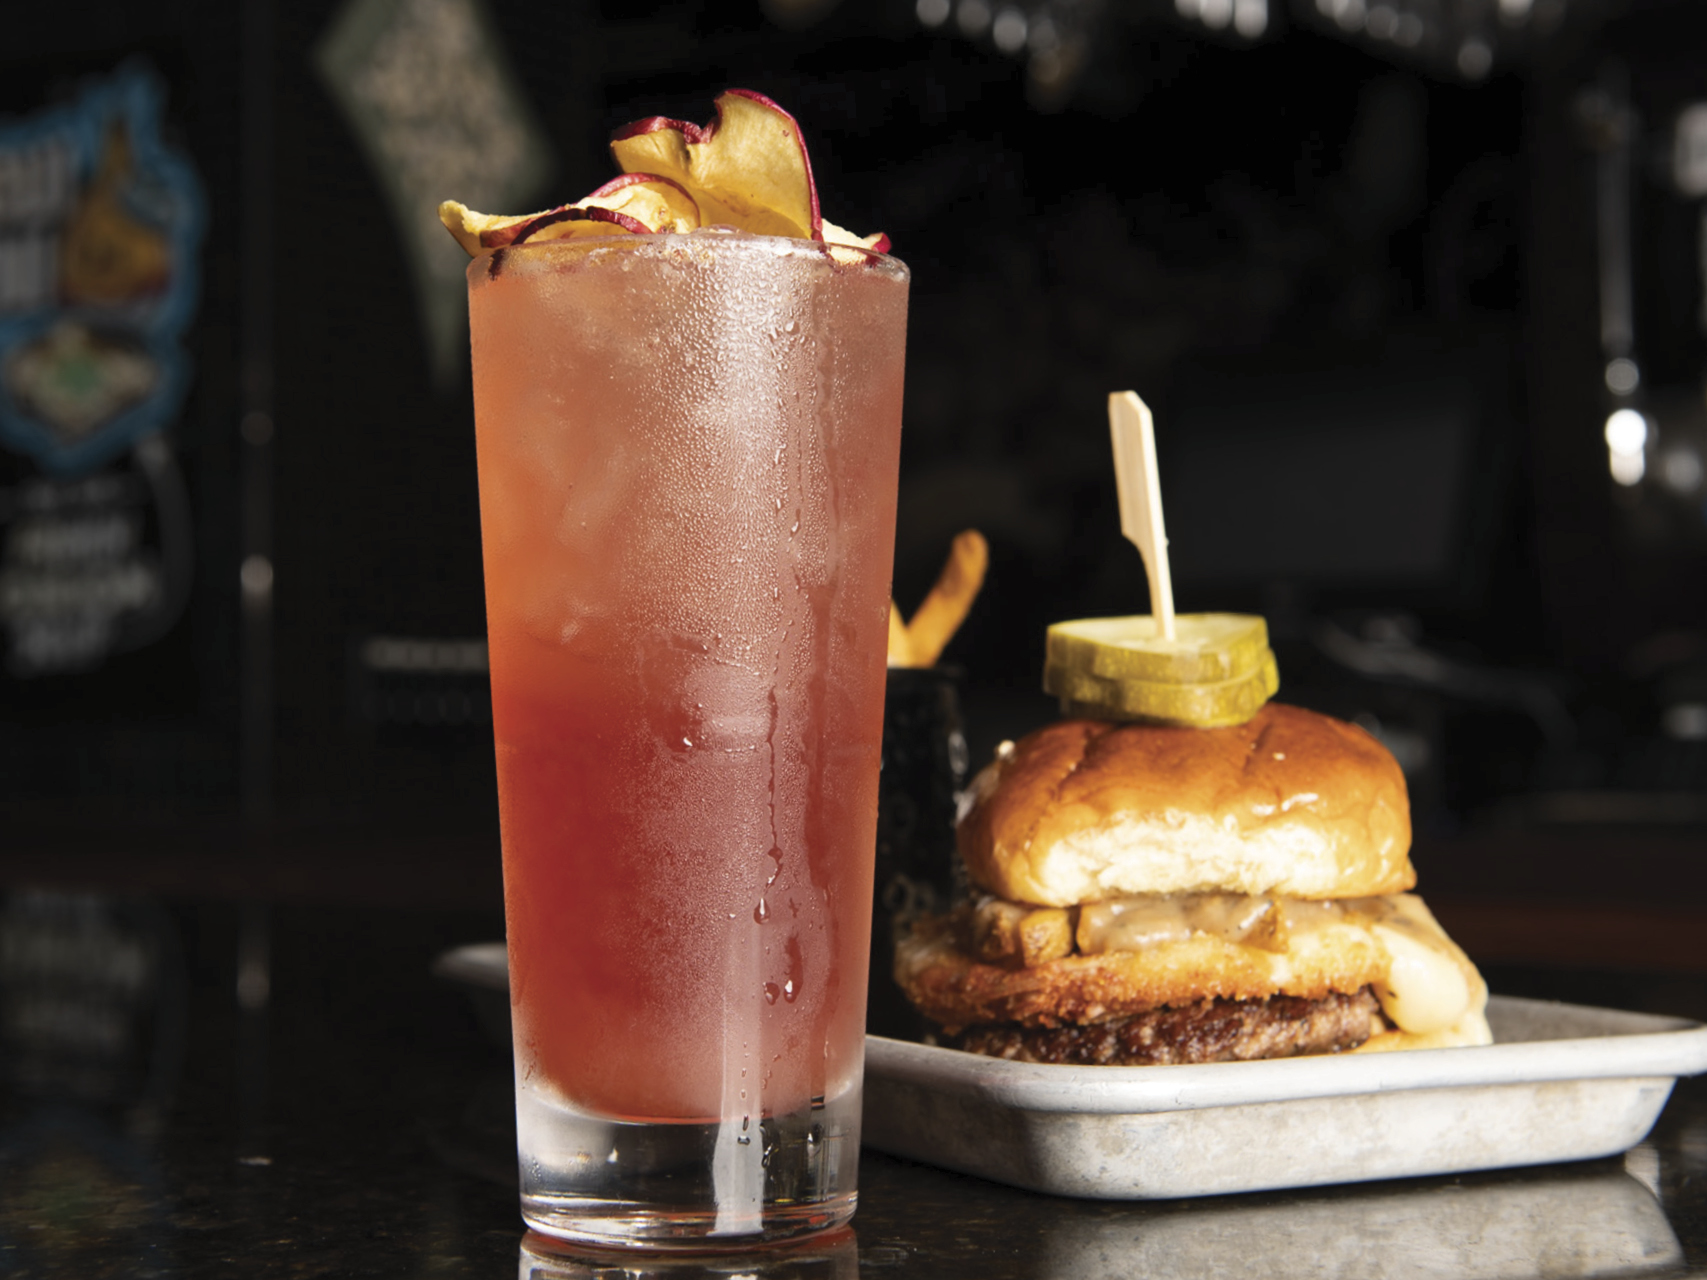 Bar Louie’s featured Cocktail for this program is the Bourbon Apple Highball: Maker’s Mark Bourbon, Pama Liqueur, apple, cranberry, lemon, Fever Tree Ginger Beer, topped with apple chips.